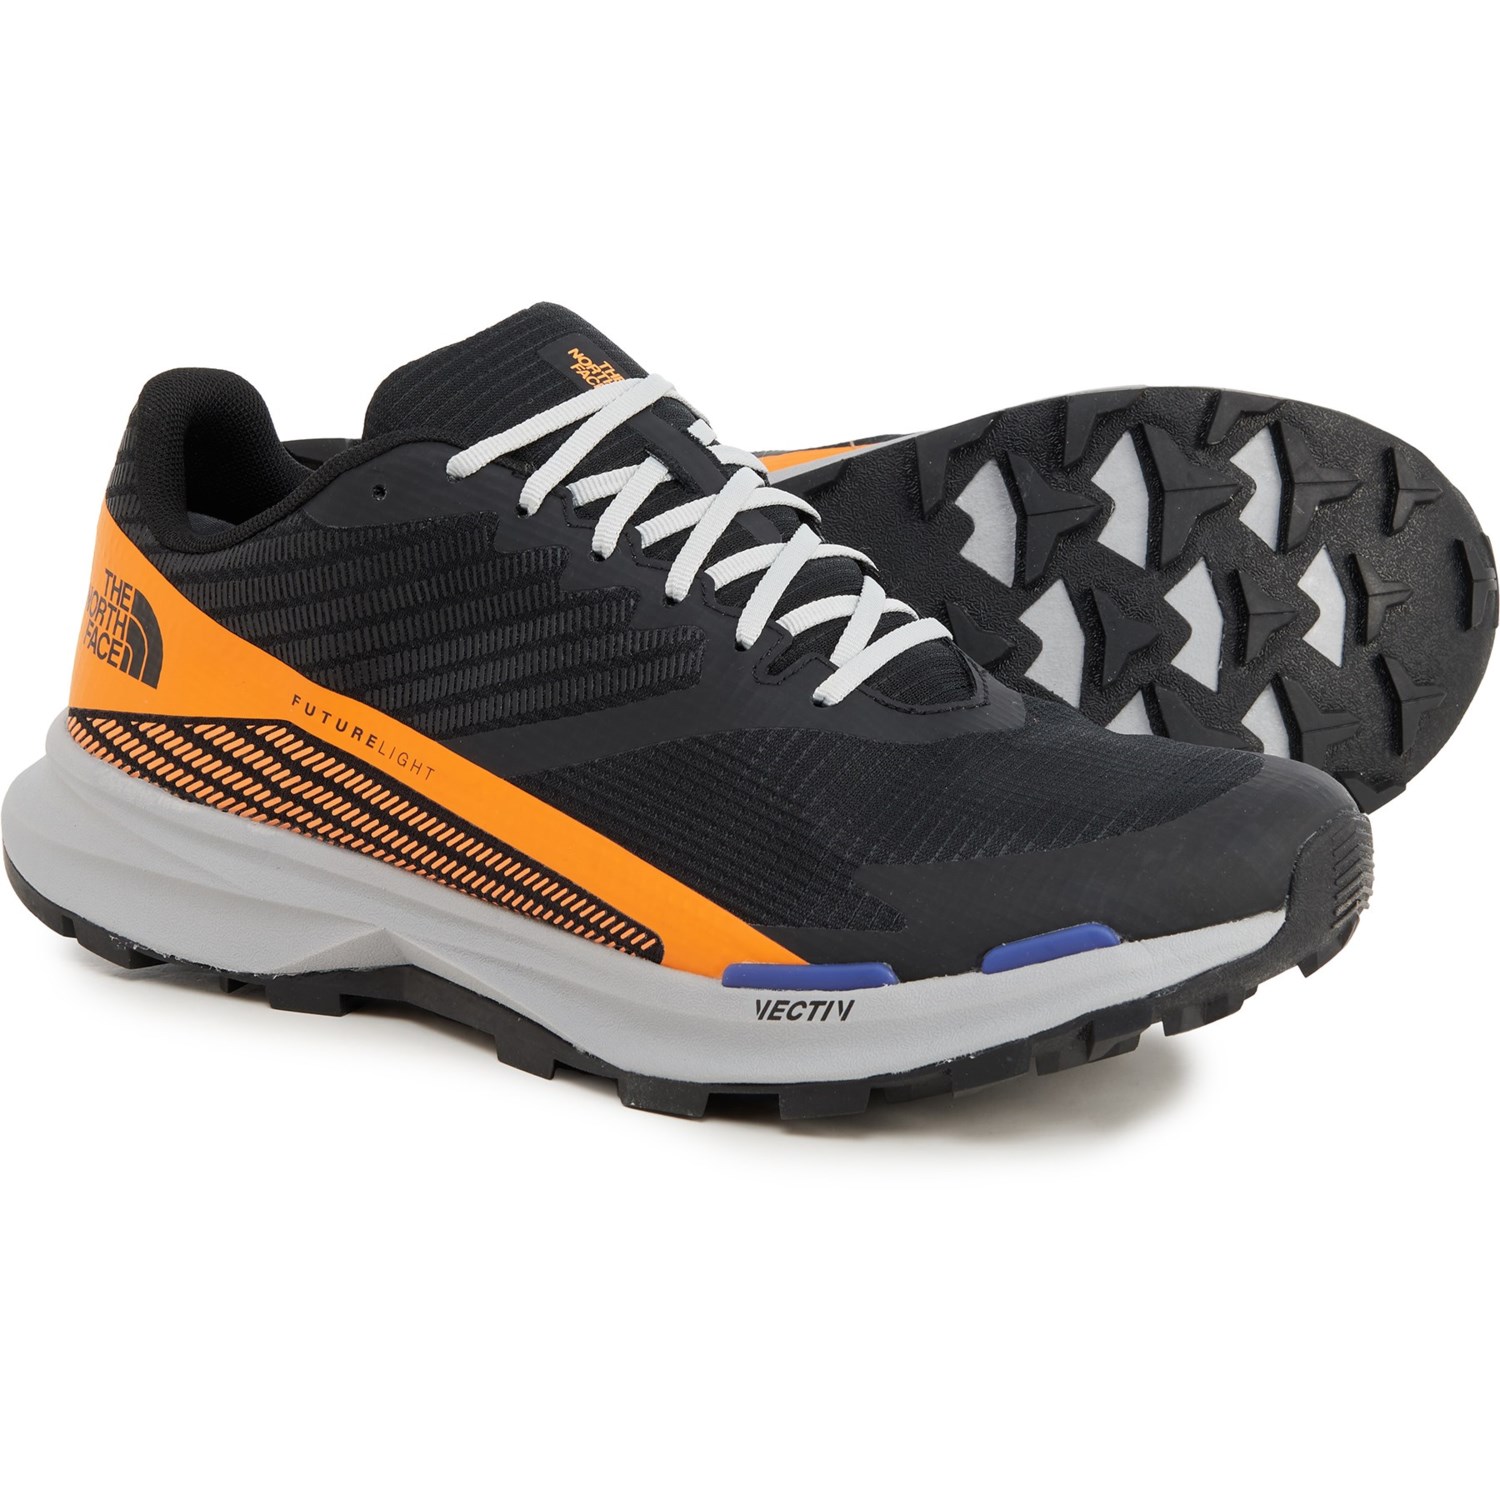 Tussendoortje wijs tanker The North Face VECTIV® Levitum FUTURELIGHT® Trail Running Shoes (For Men)